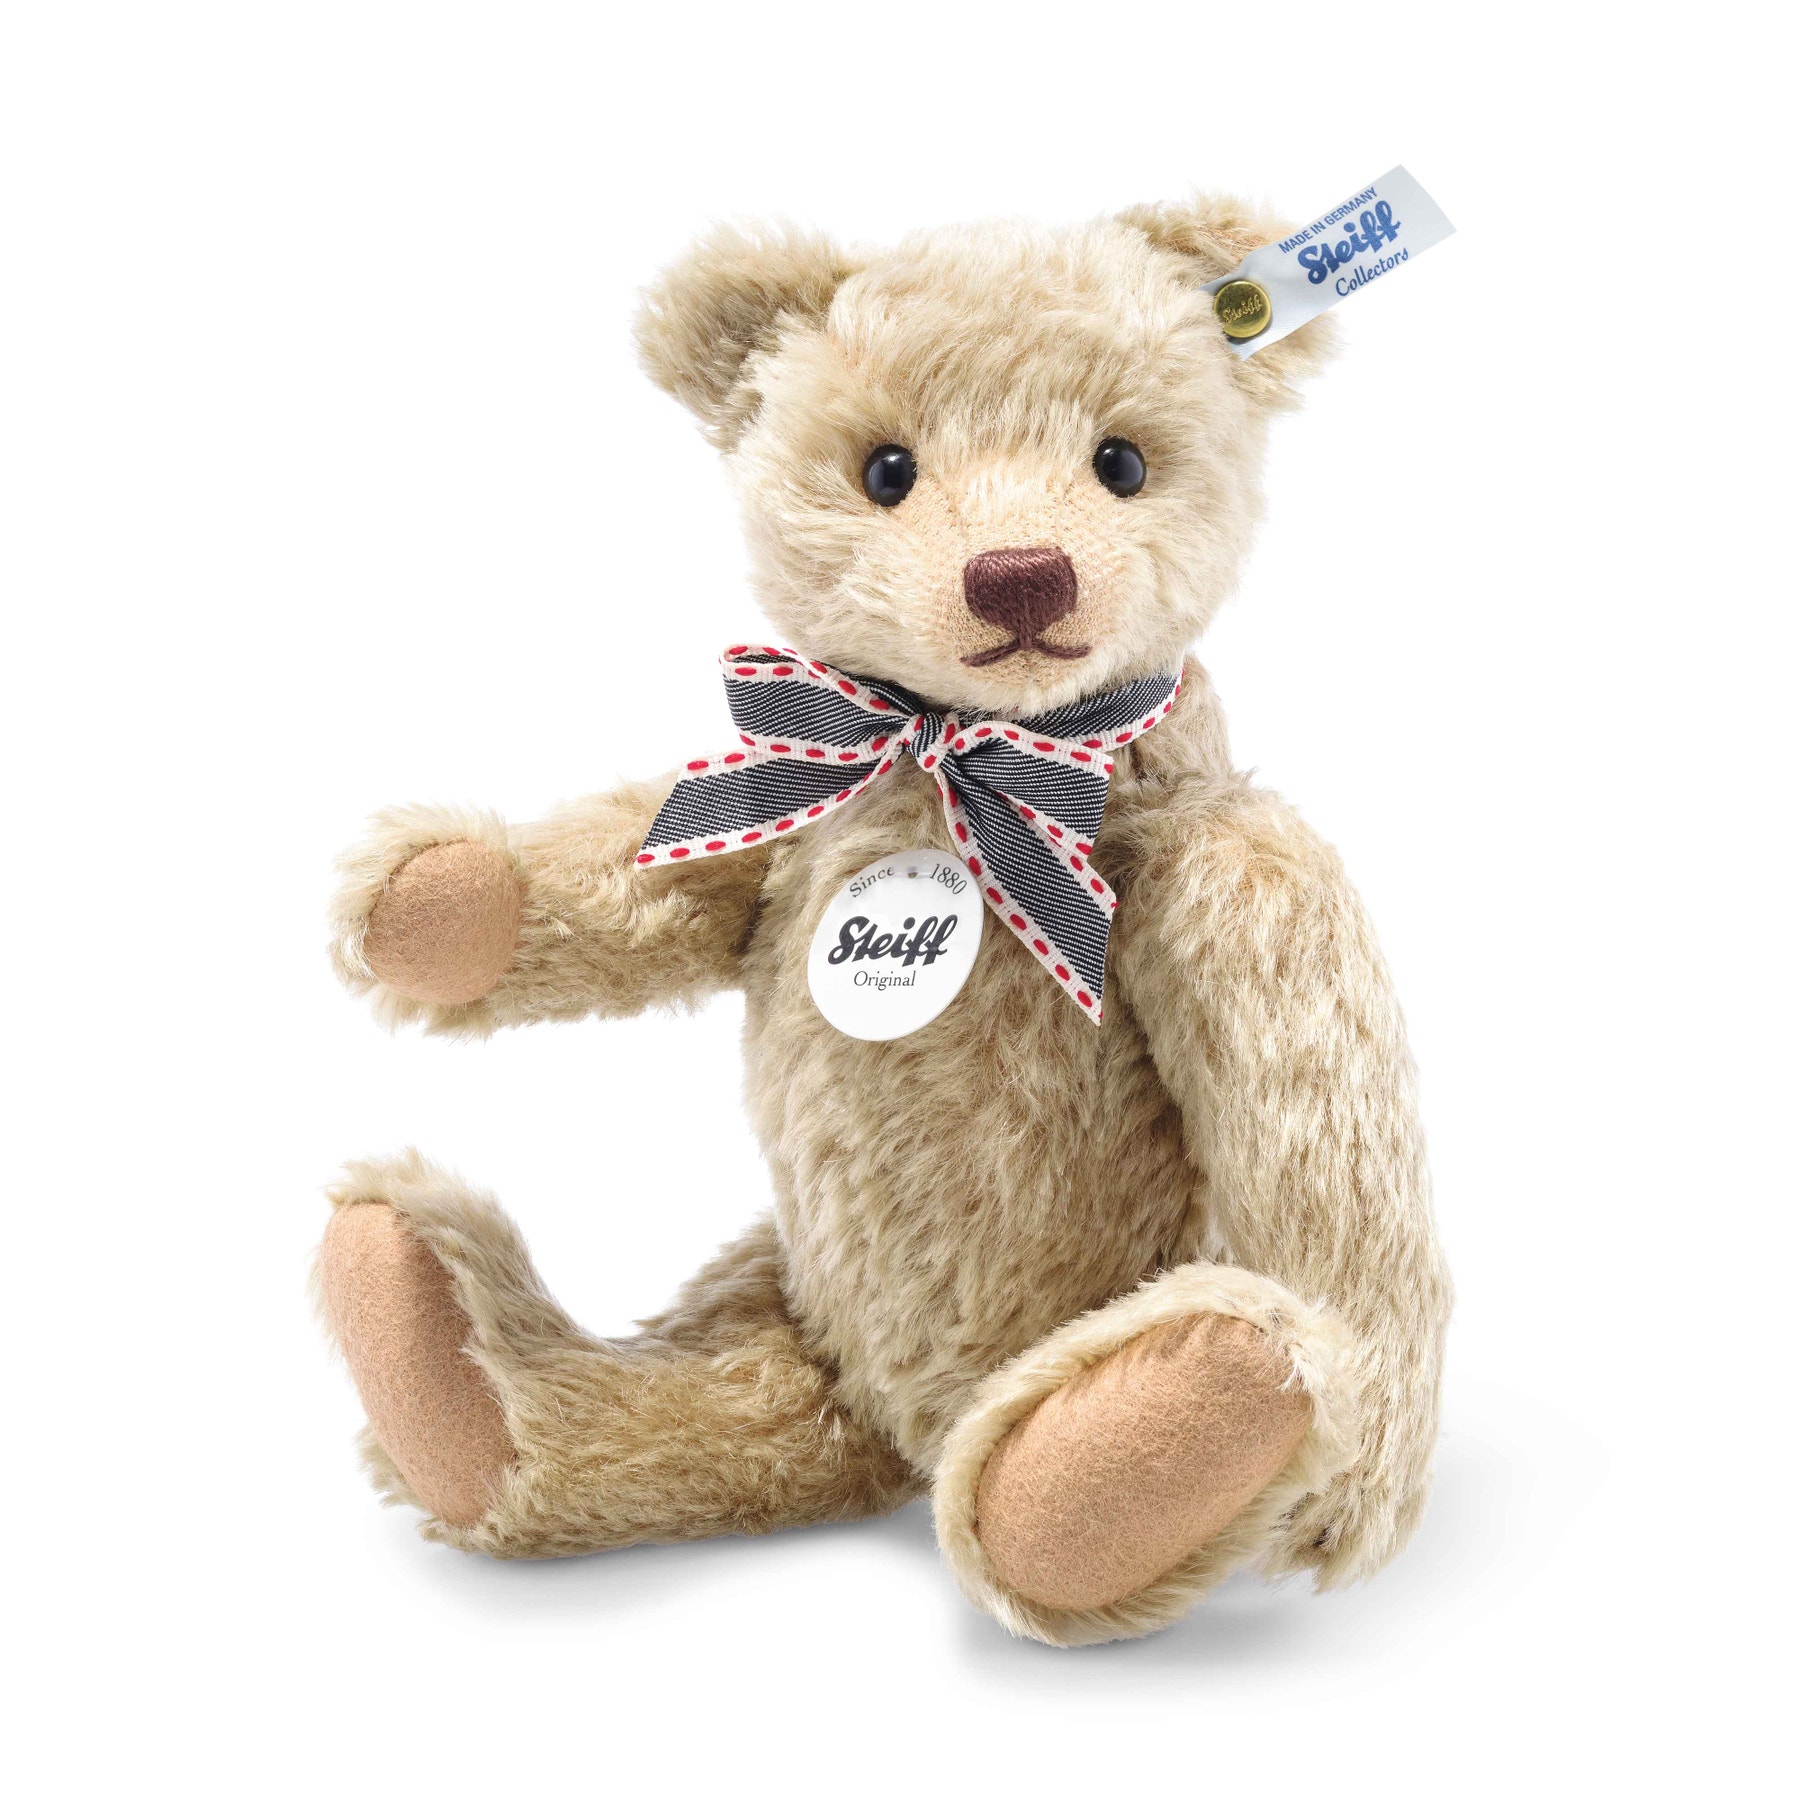 Ours Teddy classique